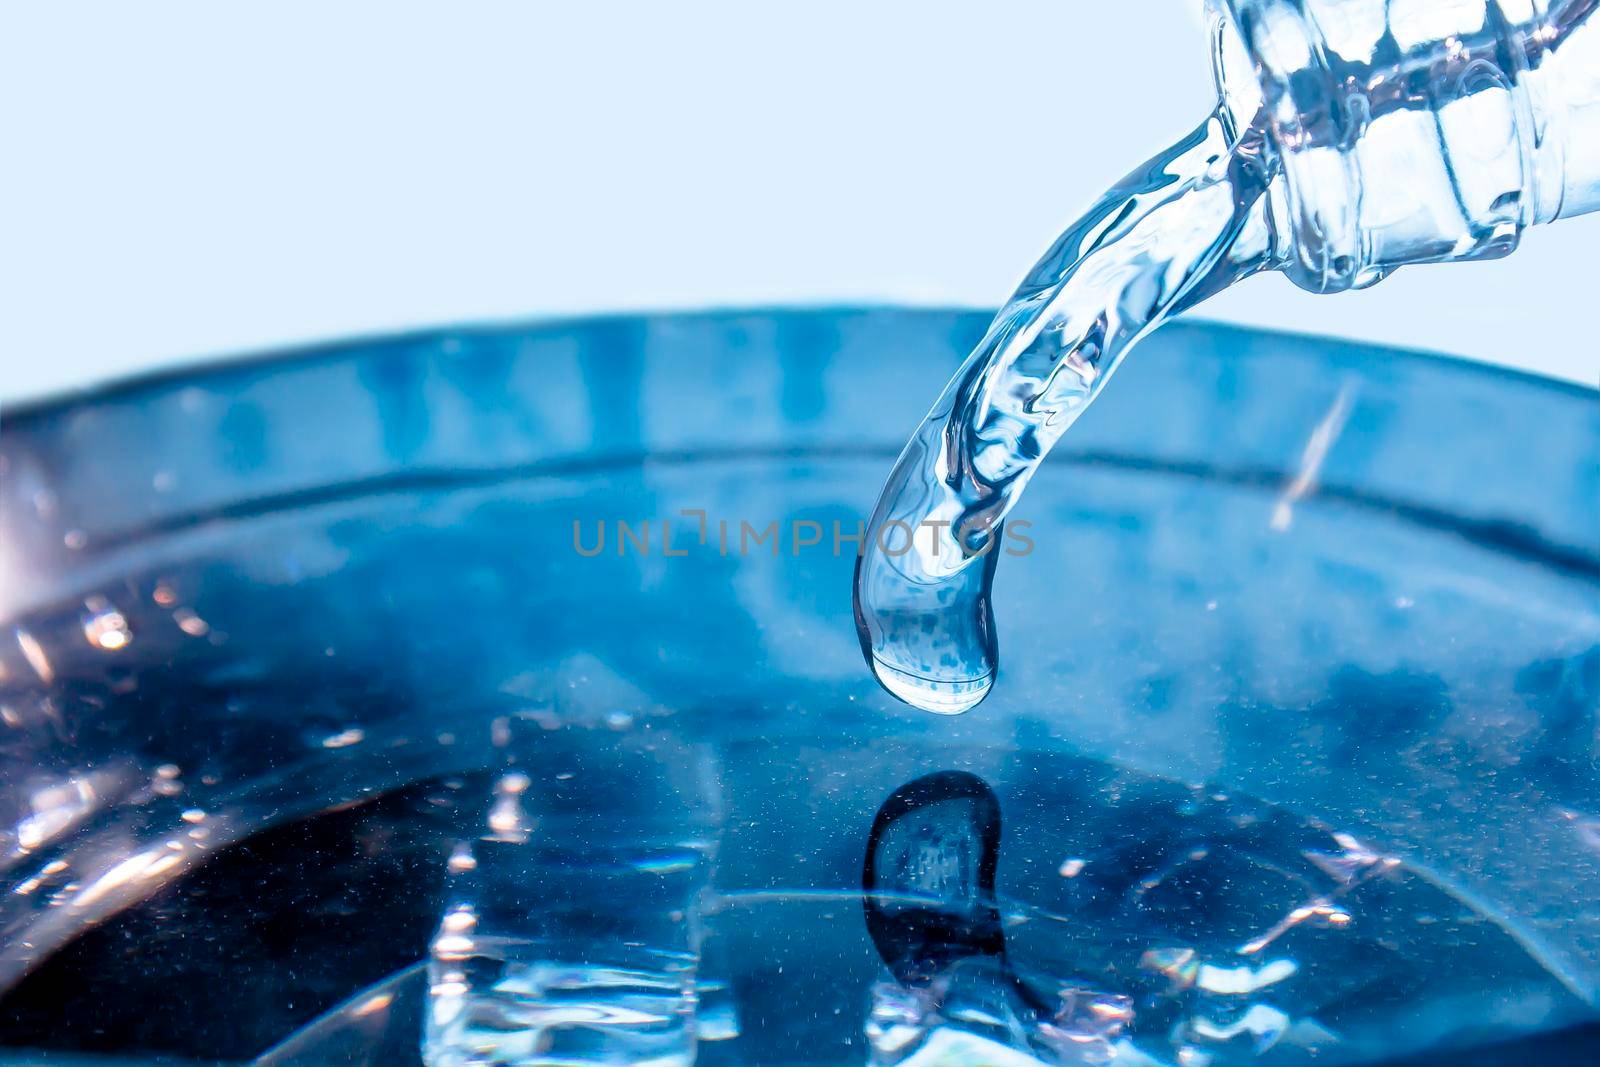 A flowing stream of blue water.A stream of blue water pours from the neck of a glass bottle.Frozen water drop photographed at high speed.Slow dripping of liquid with air bubbles.Frozen liquid splashes by YevgeniySam